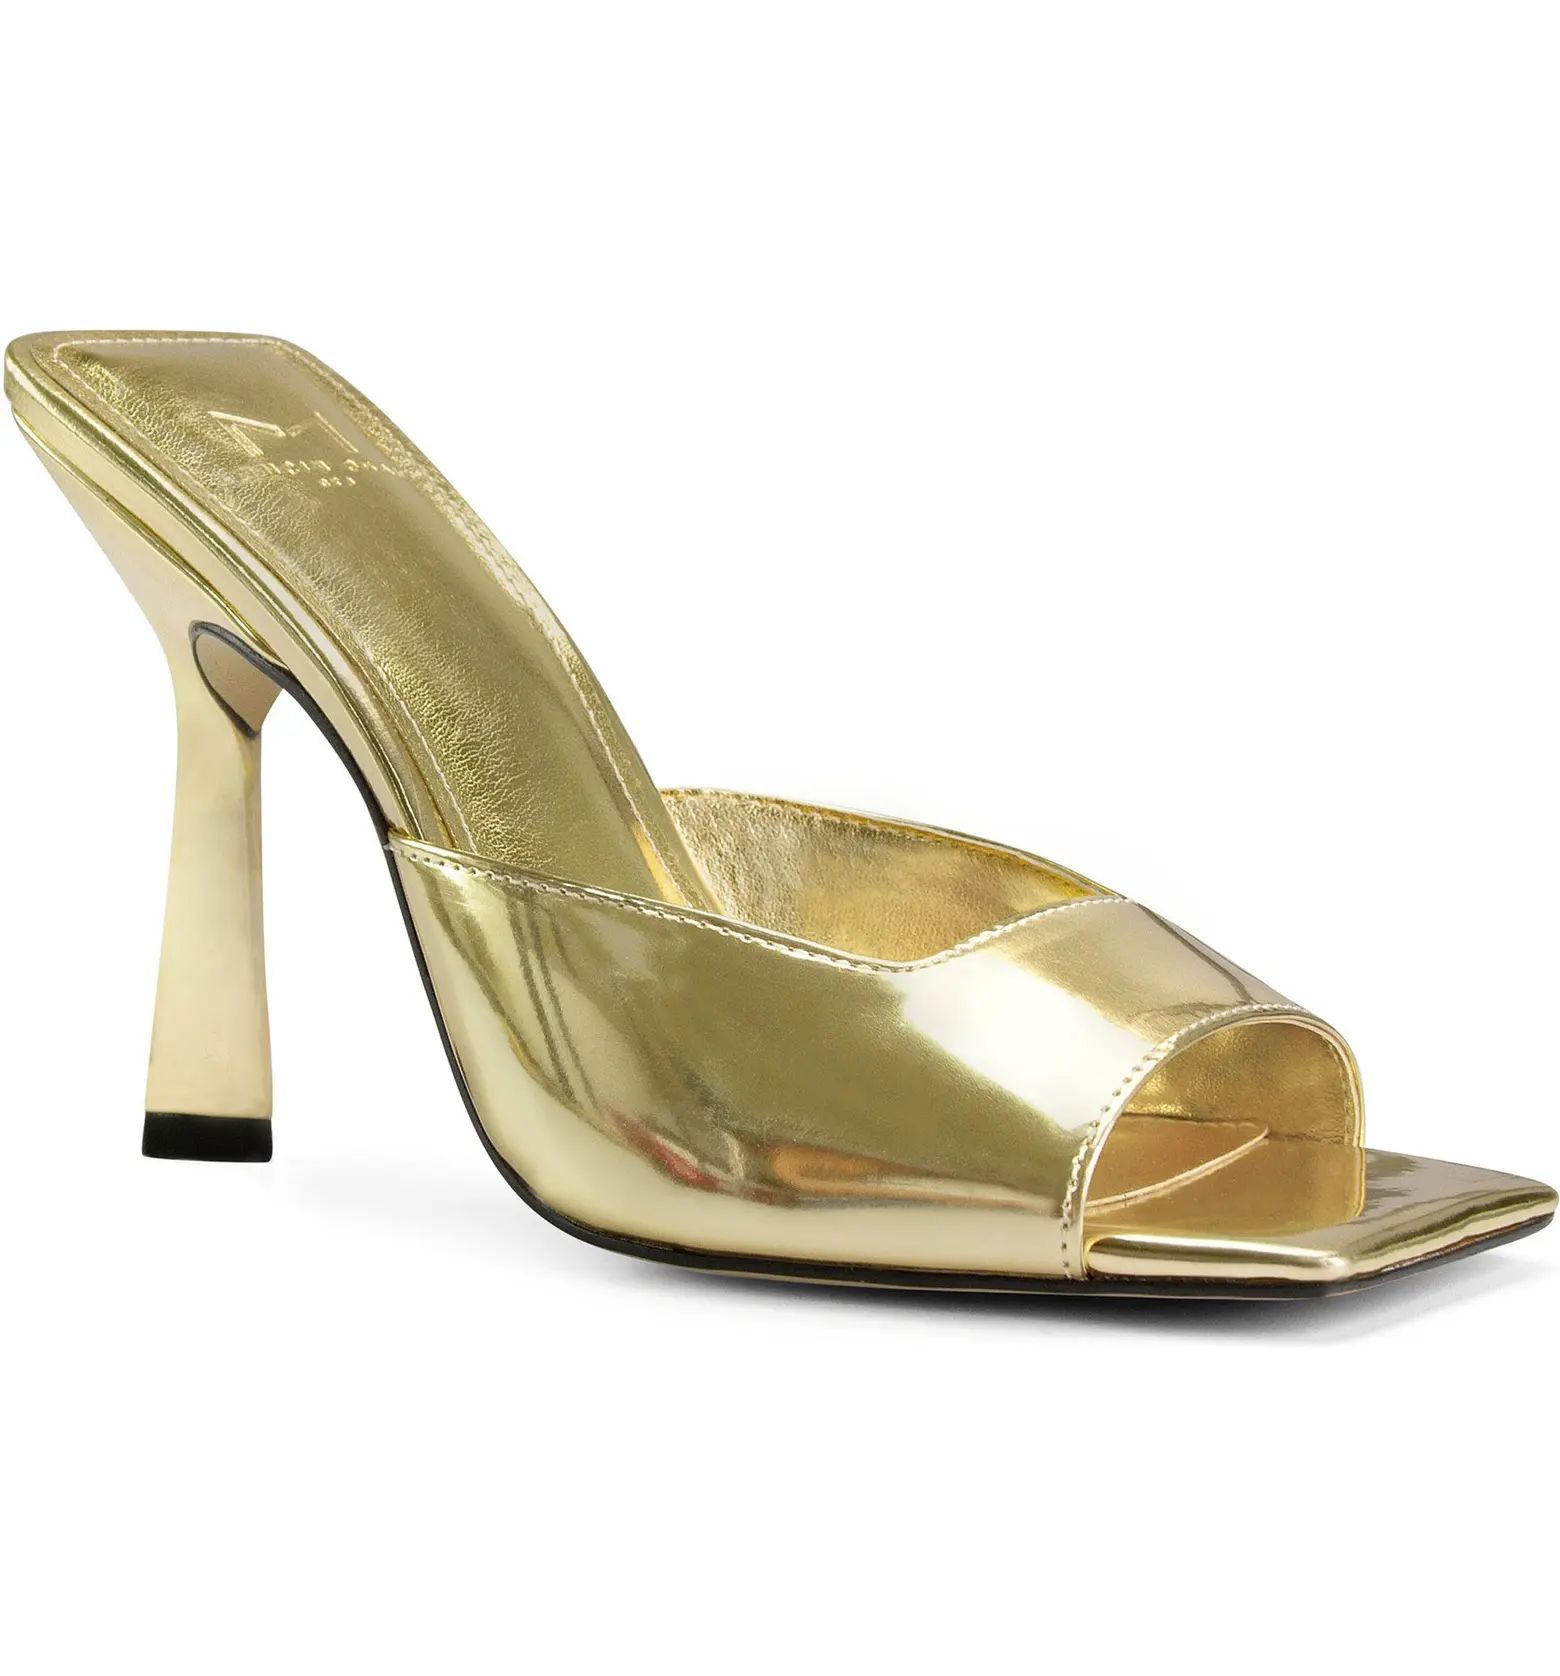 A glossy finish amps up the eye-catching appeal of a sleek sandal framed by a square toe and flar... | Nordstrom